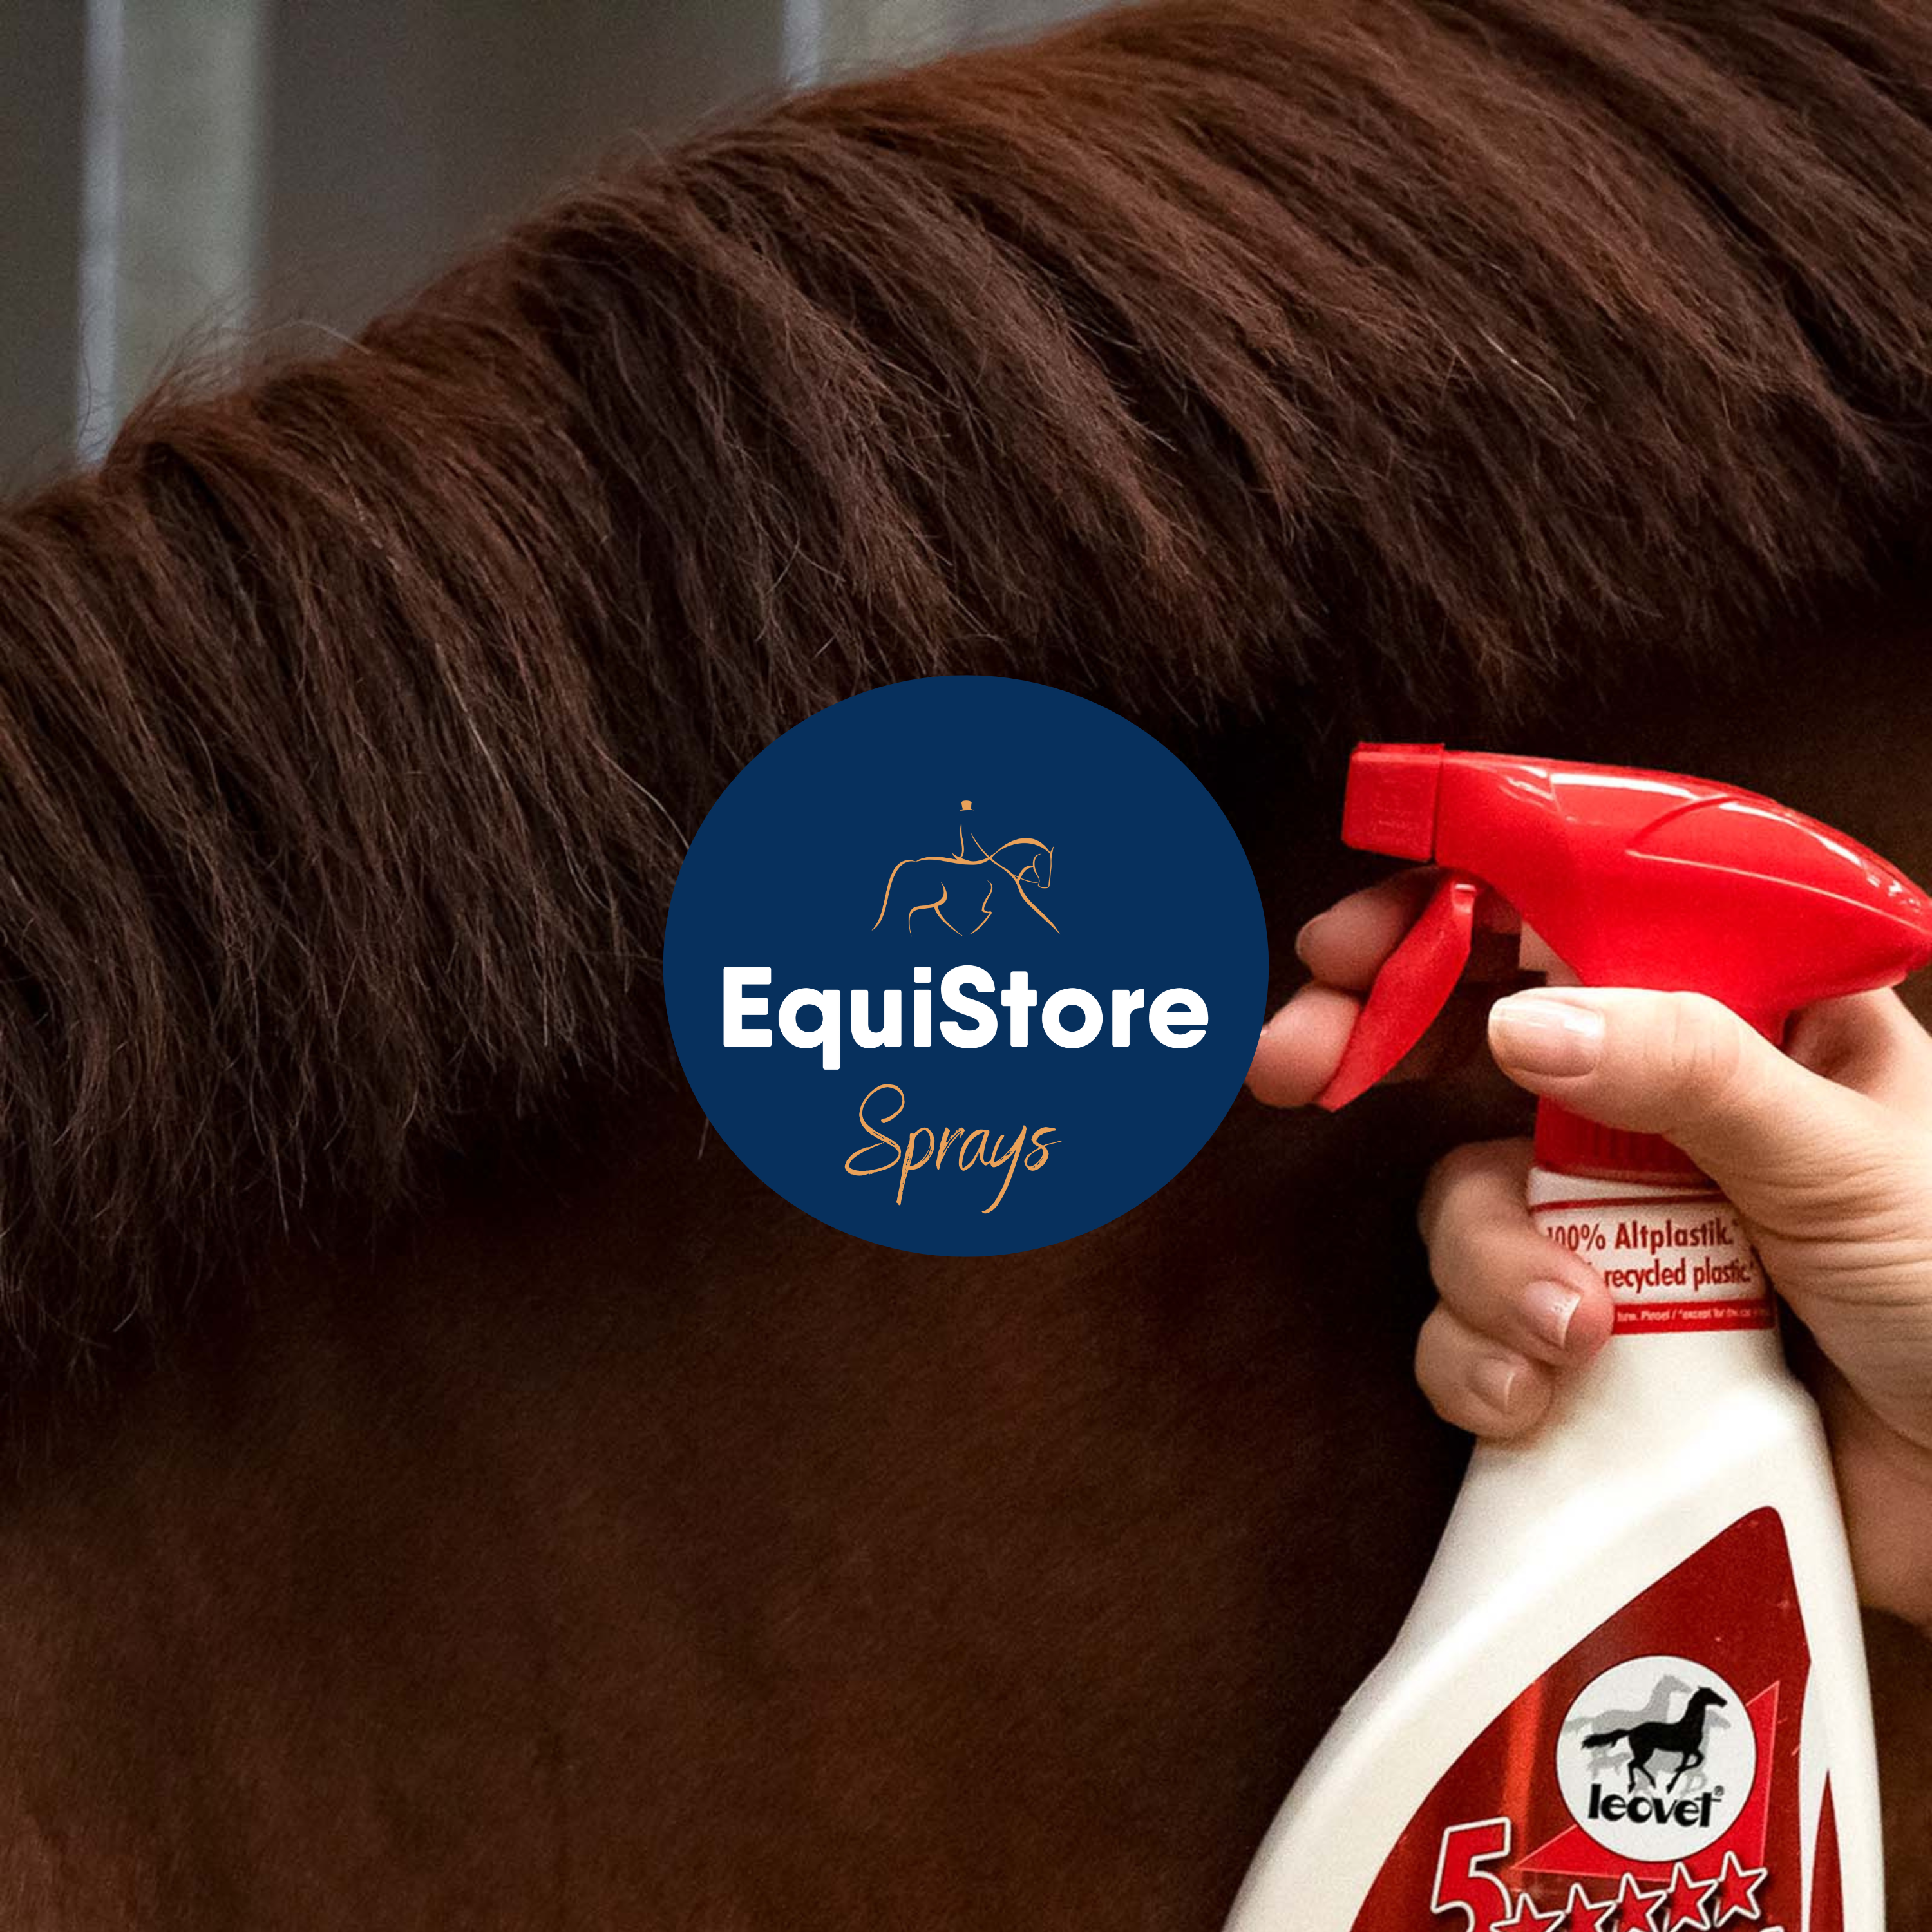 A wide selection of grooming sprays and lotions for a superior finish when grooming your horse or pony. Available in Ireland from Equistore